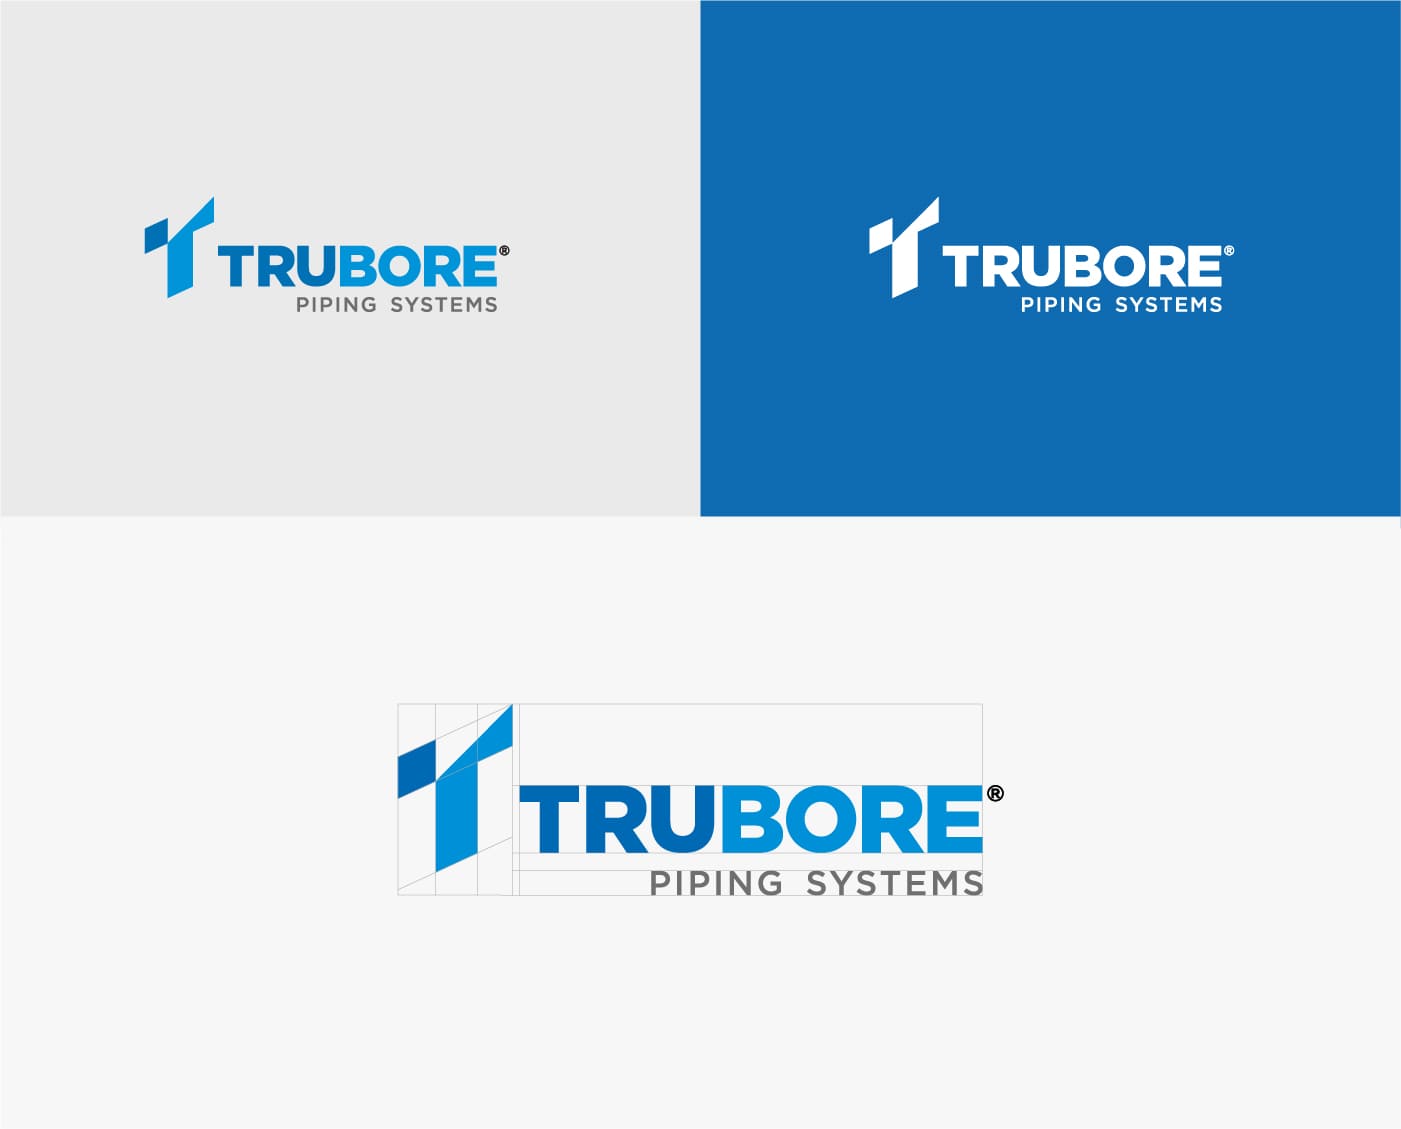 Trubore Pipes – Branding services